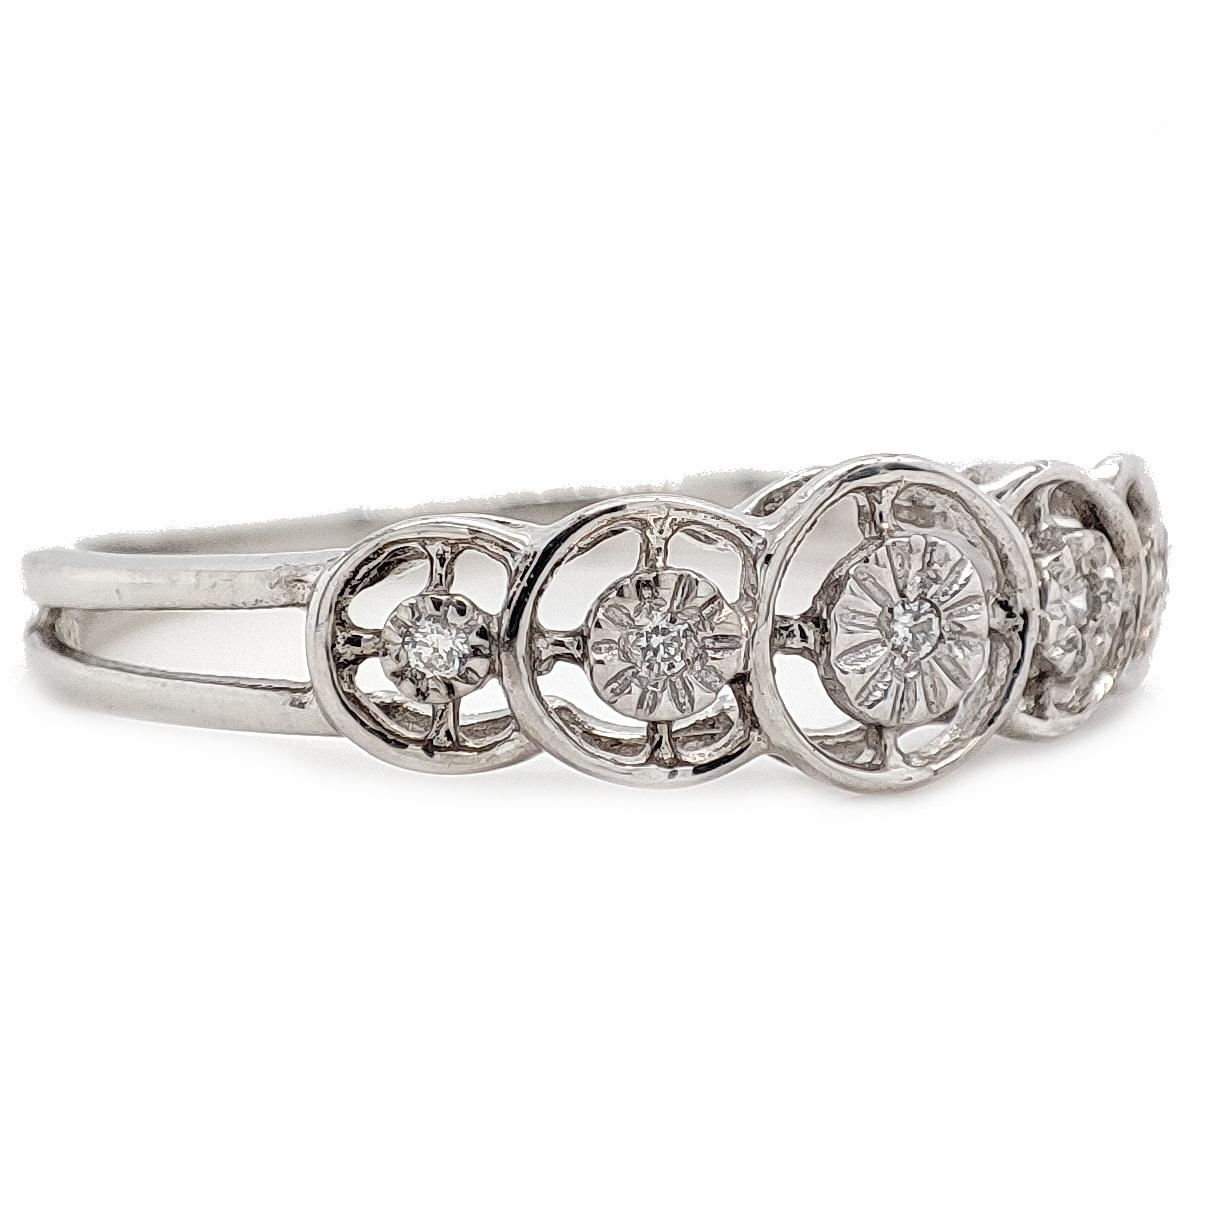 FOR US CUSTOMER NO VAT!

This elegant ring features a dainty 0.05-carat D - F White diamond with a clarity VS1 - VS2 set in a 14K white gold band. The petite size and delicate design make it a subtle yet sophisticated accessory.

Crafted precisely,